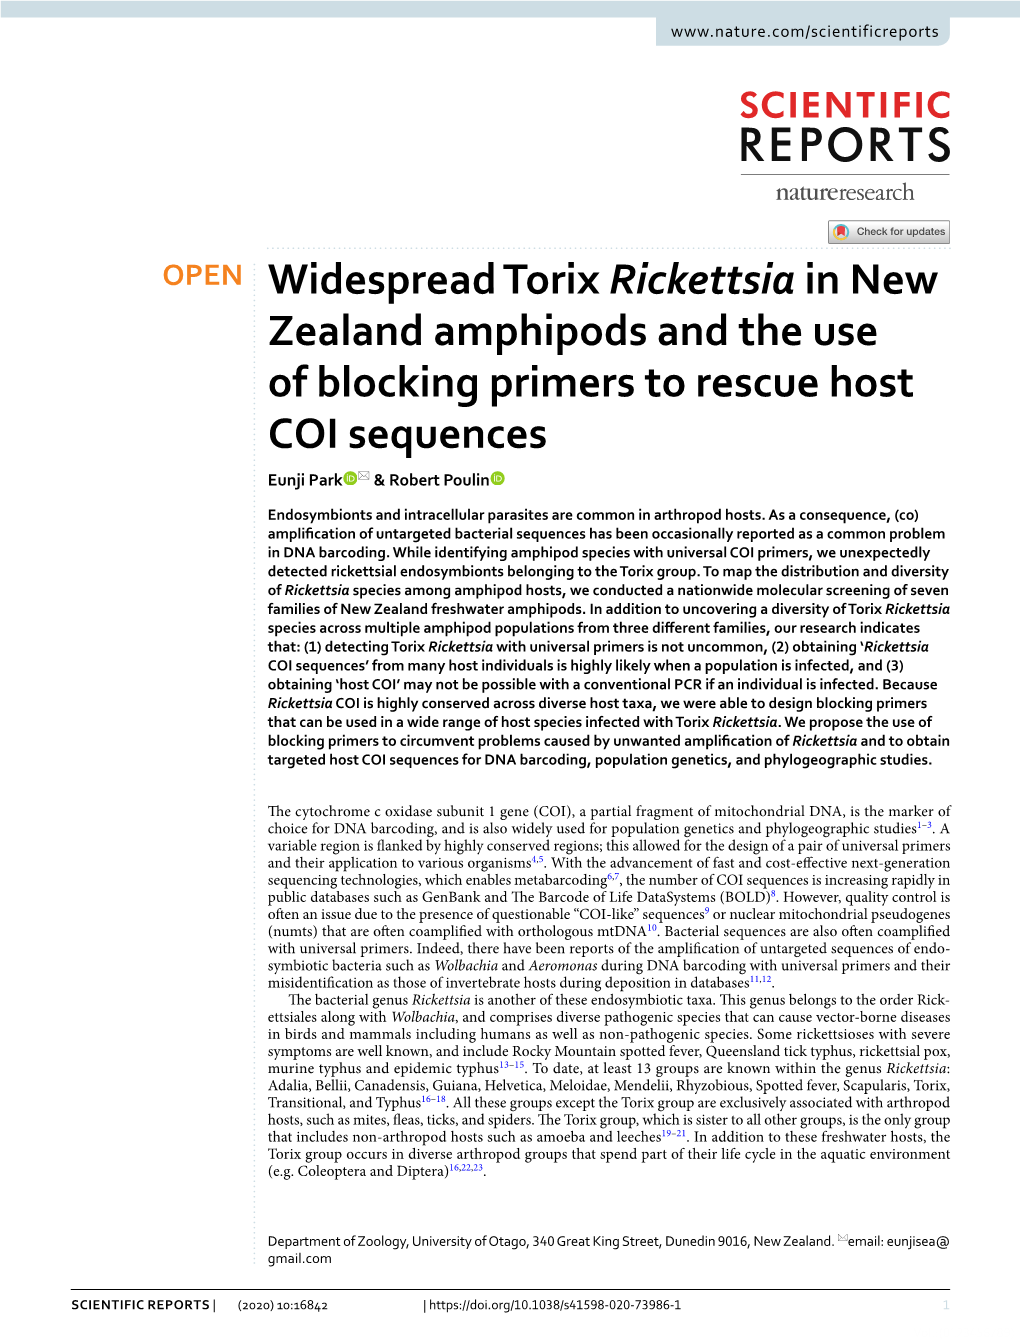 Widespread Torix Rickettsia in New Zealand Amphipods and the Use of Blocking Primers to Rescue Host COI Sequences Eunji Park * & Robert Poulin